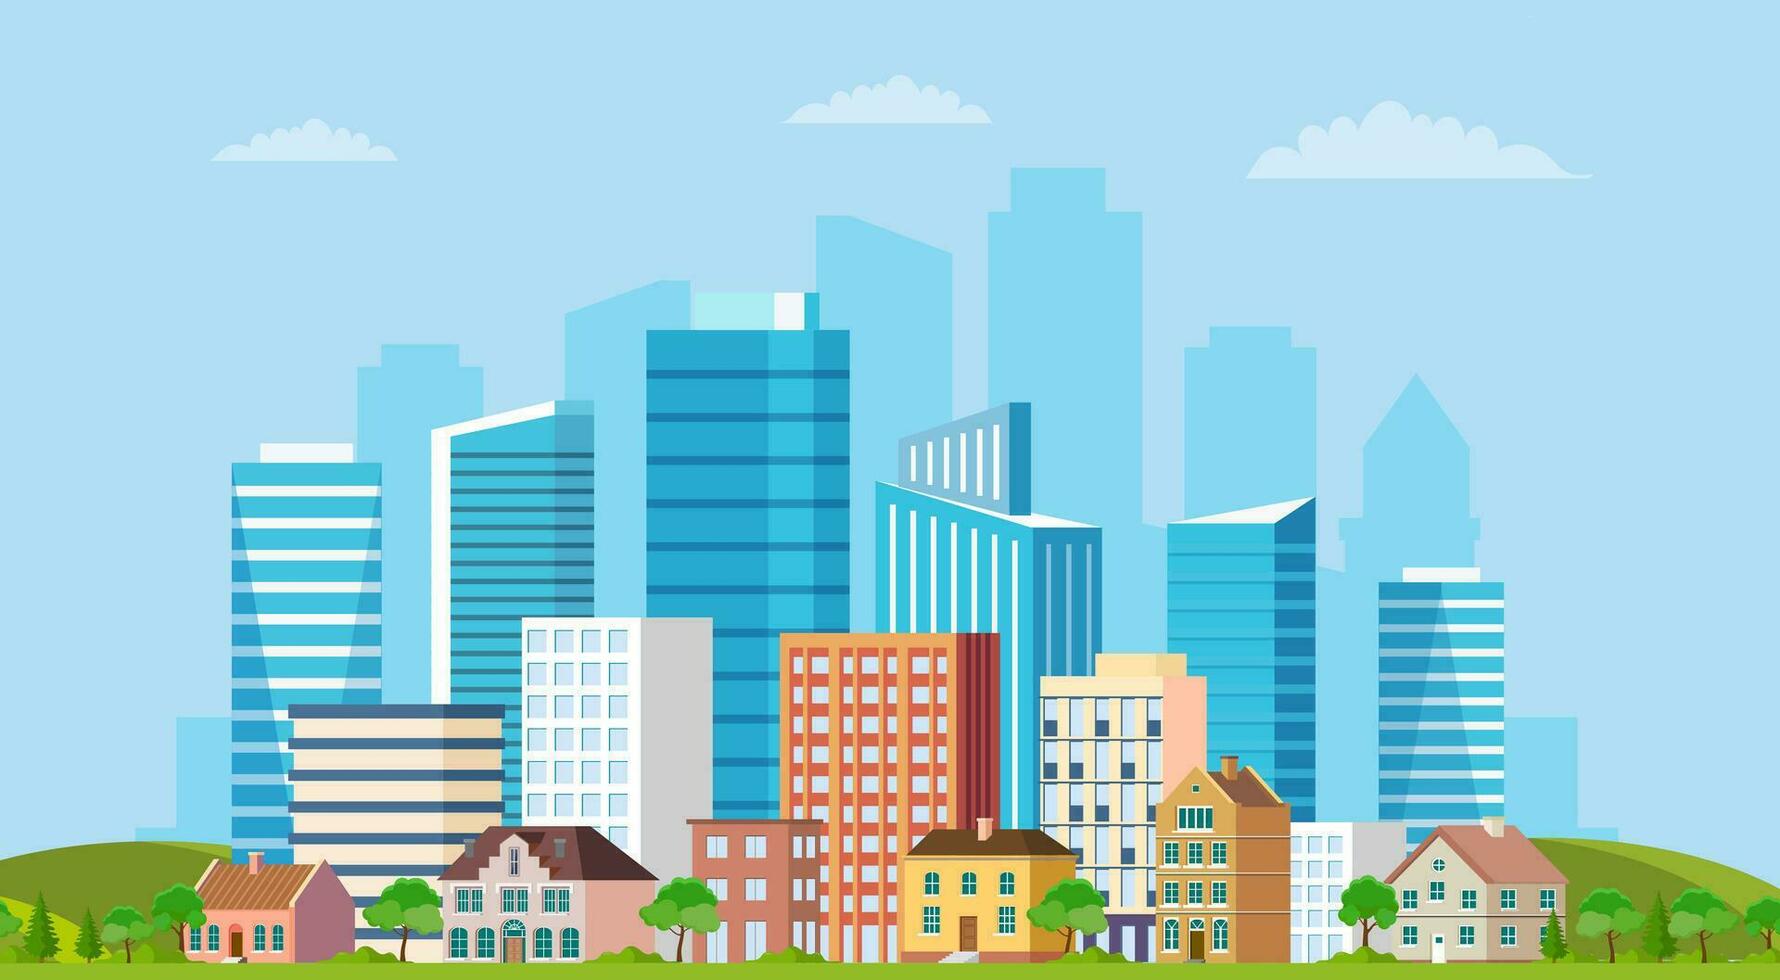 Landscape with buildings. city concept and suburban life. City street, large modern buildings, skyscrapers. Vector illustration in flat style